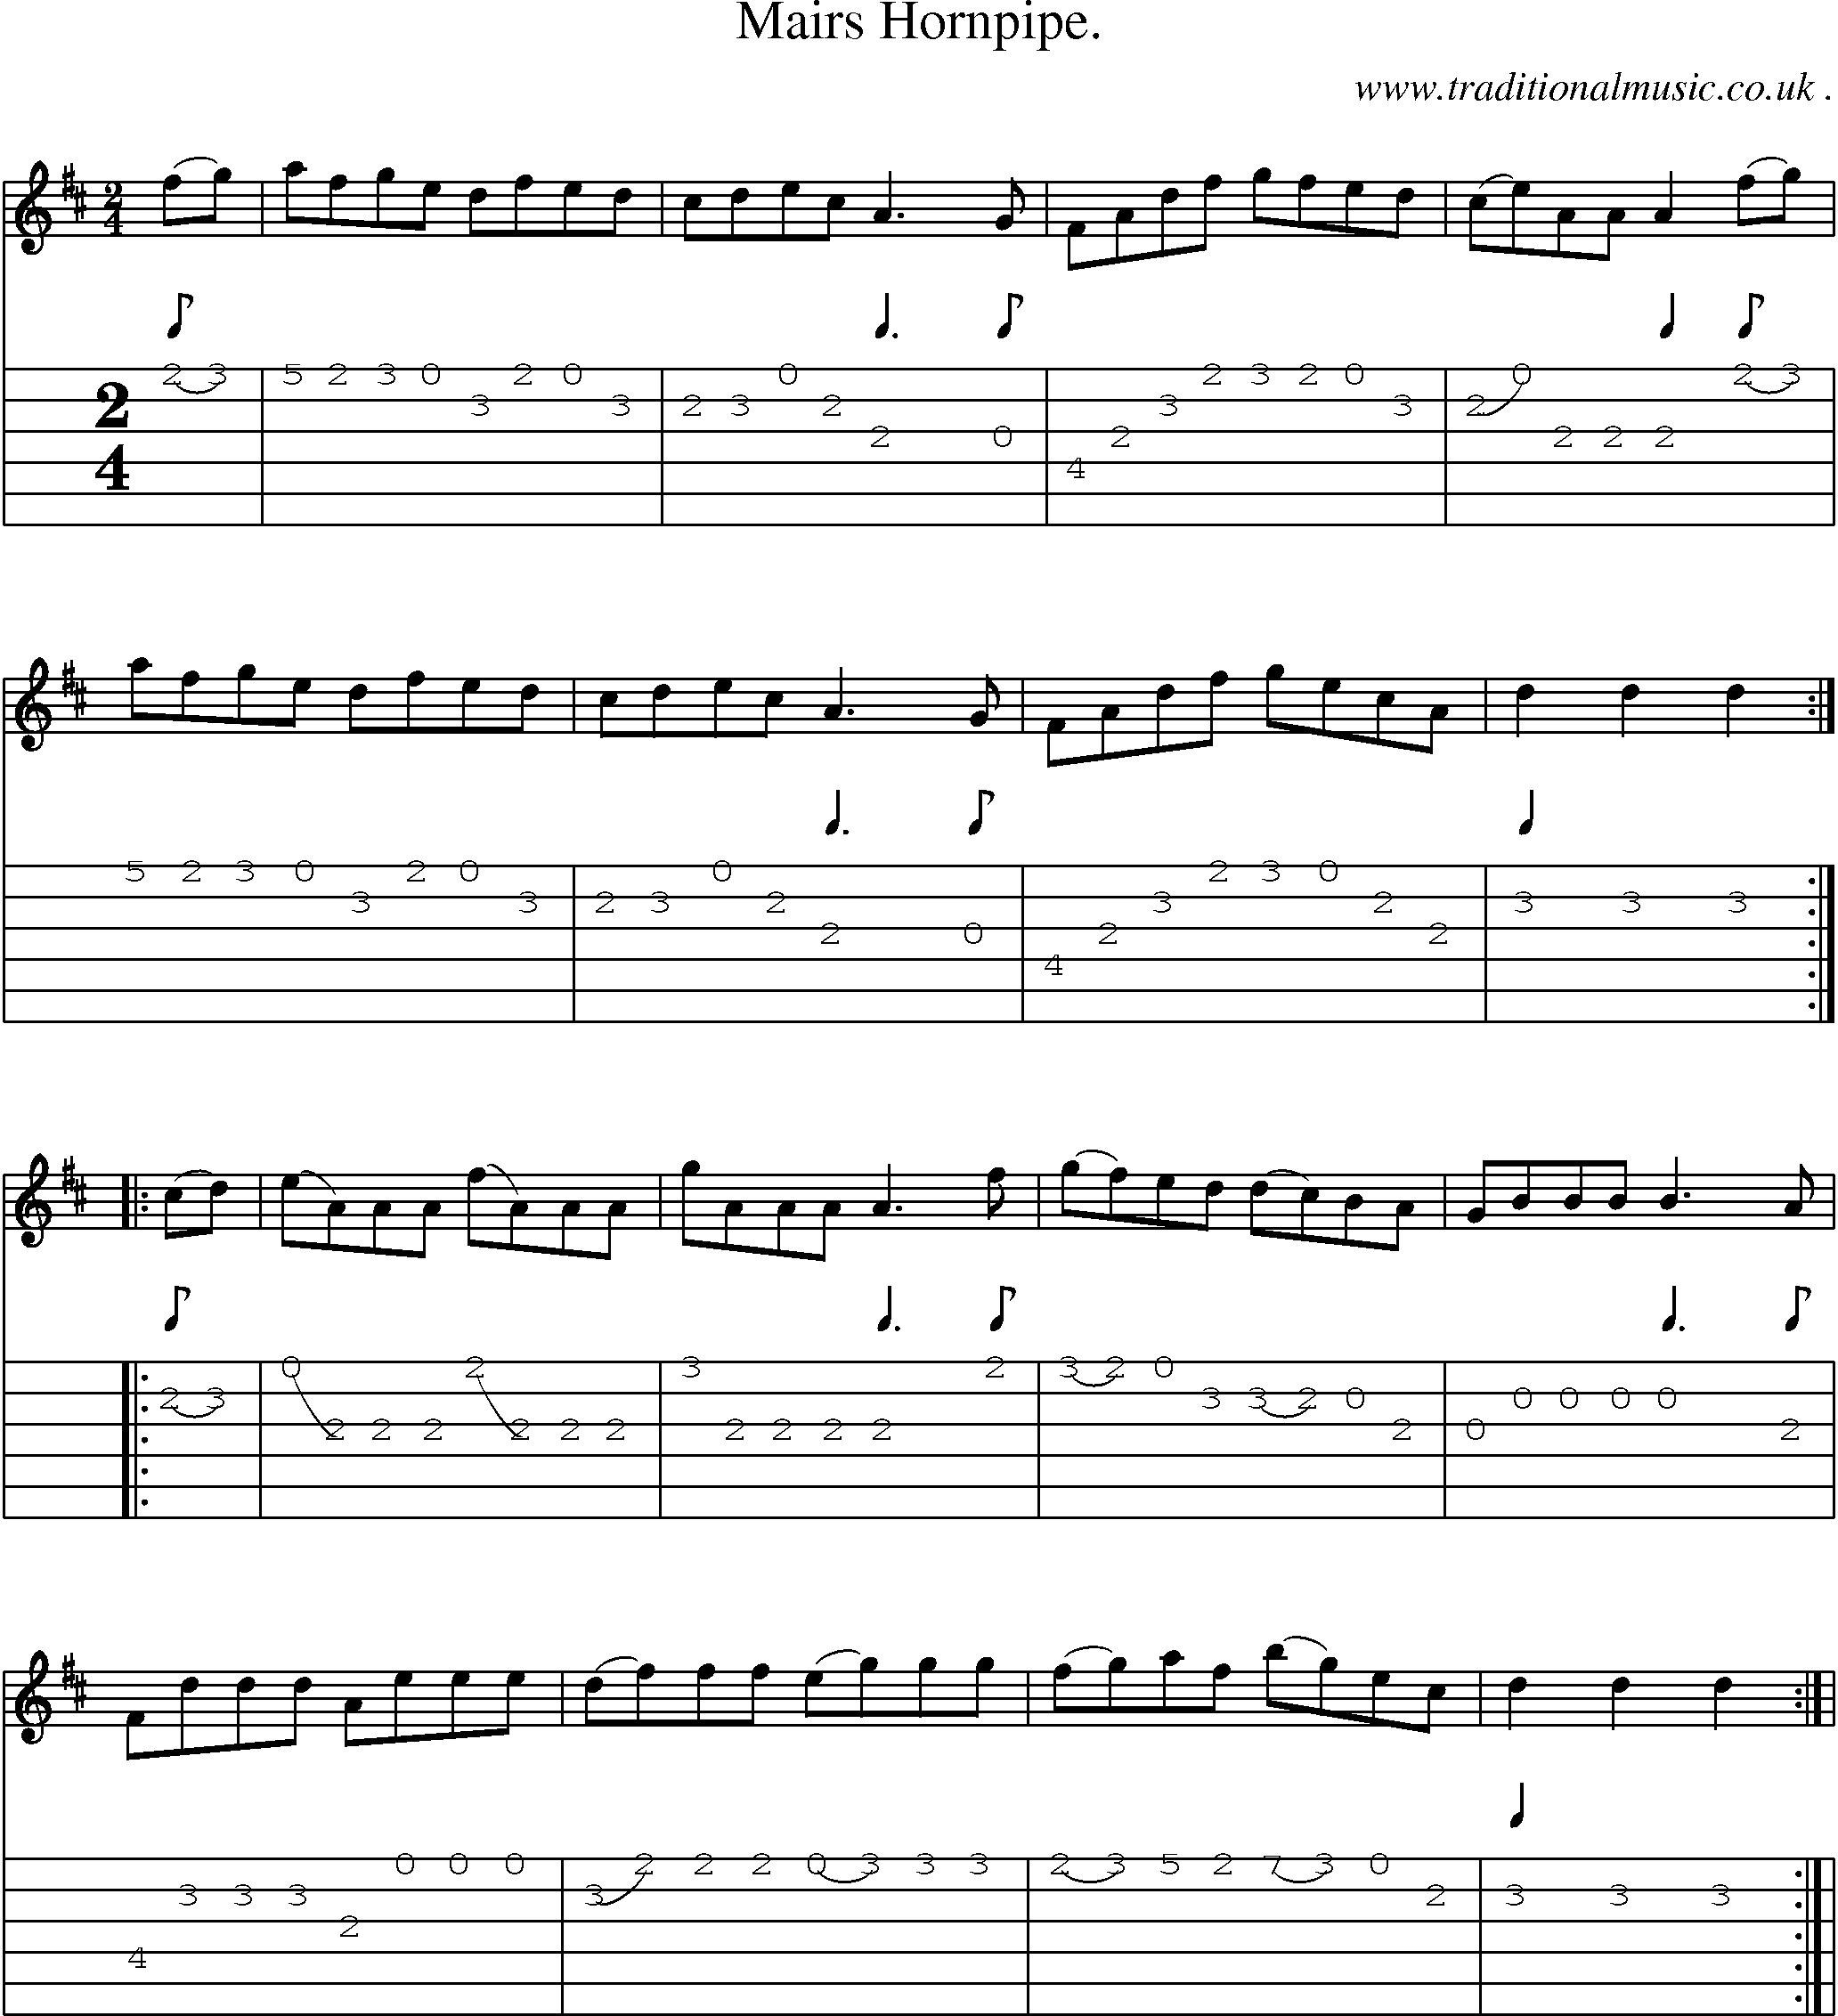 Sheet-Music and Guitar Tabs for Mairs Hornpipe